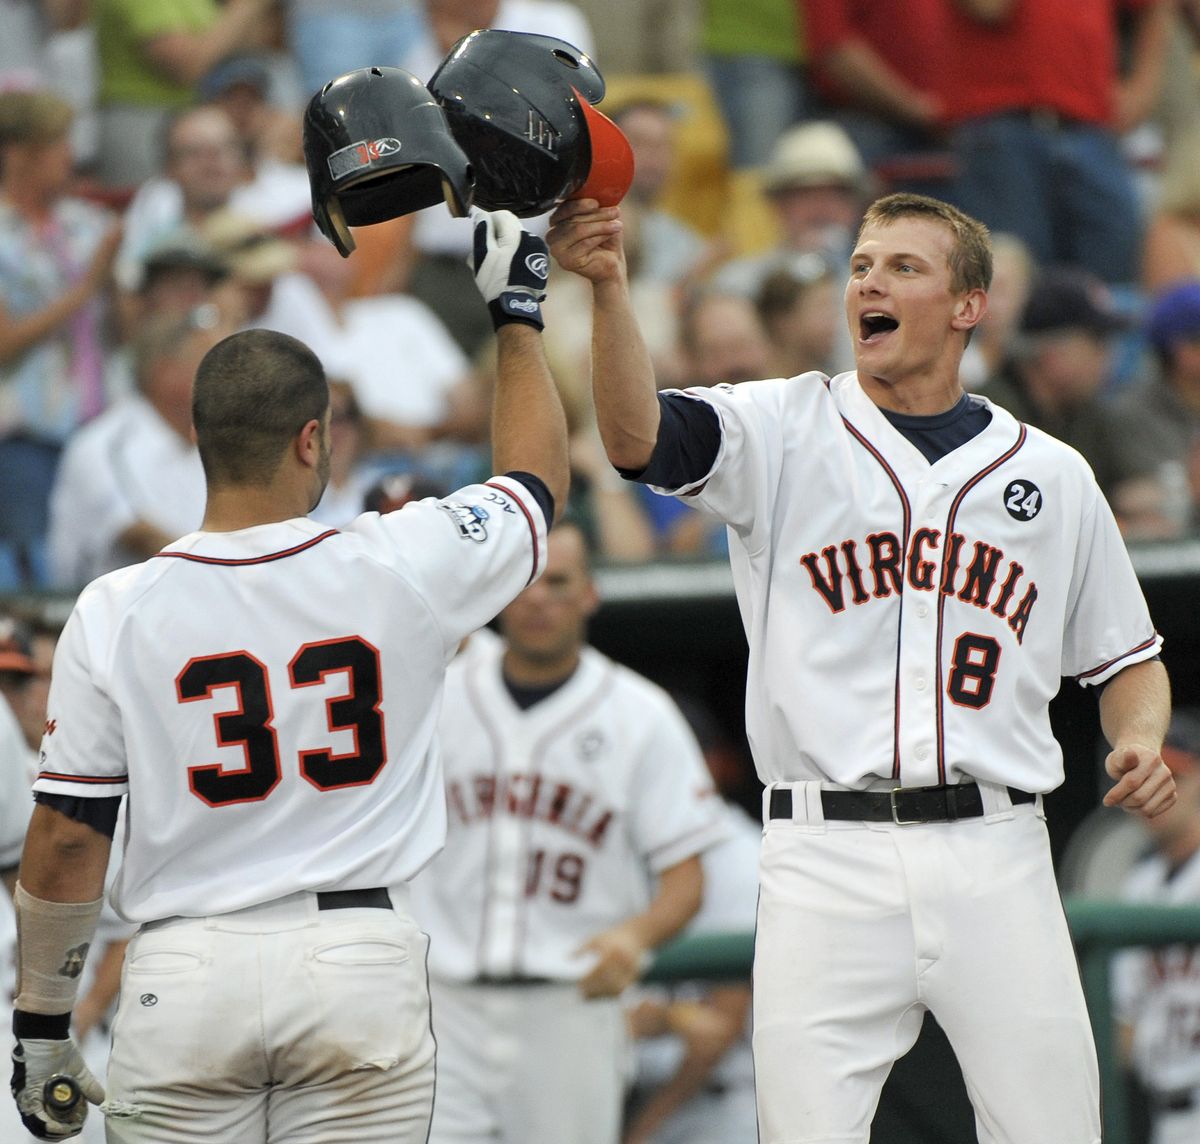 Virginia’s John Hicks, right, celebrates after hitting a home run in the 2009 College World Series. (Associated Press)